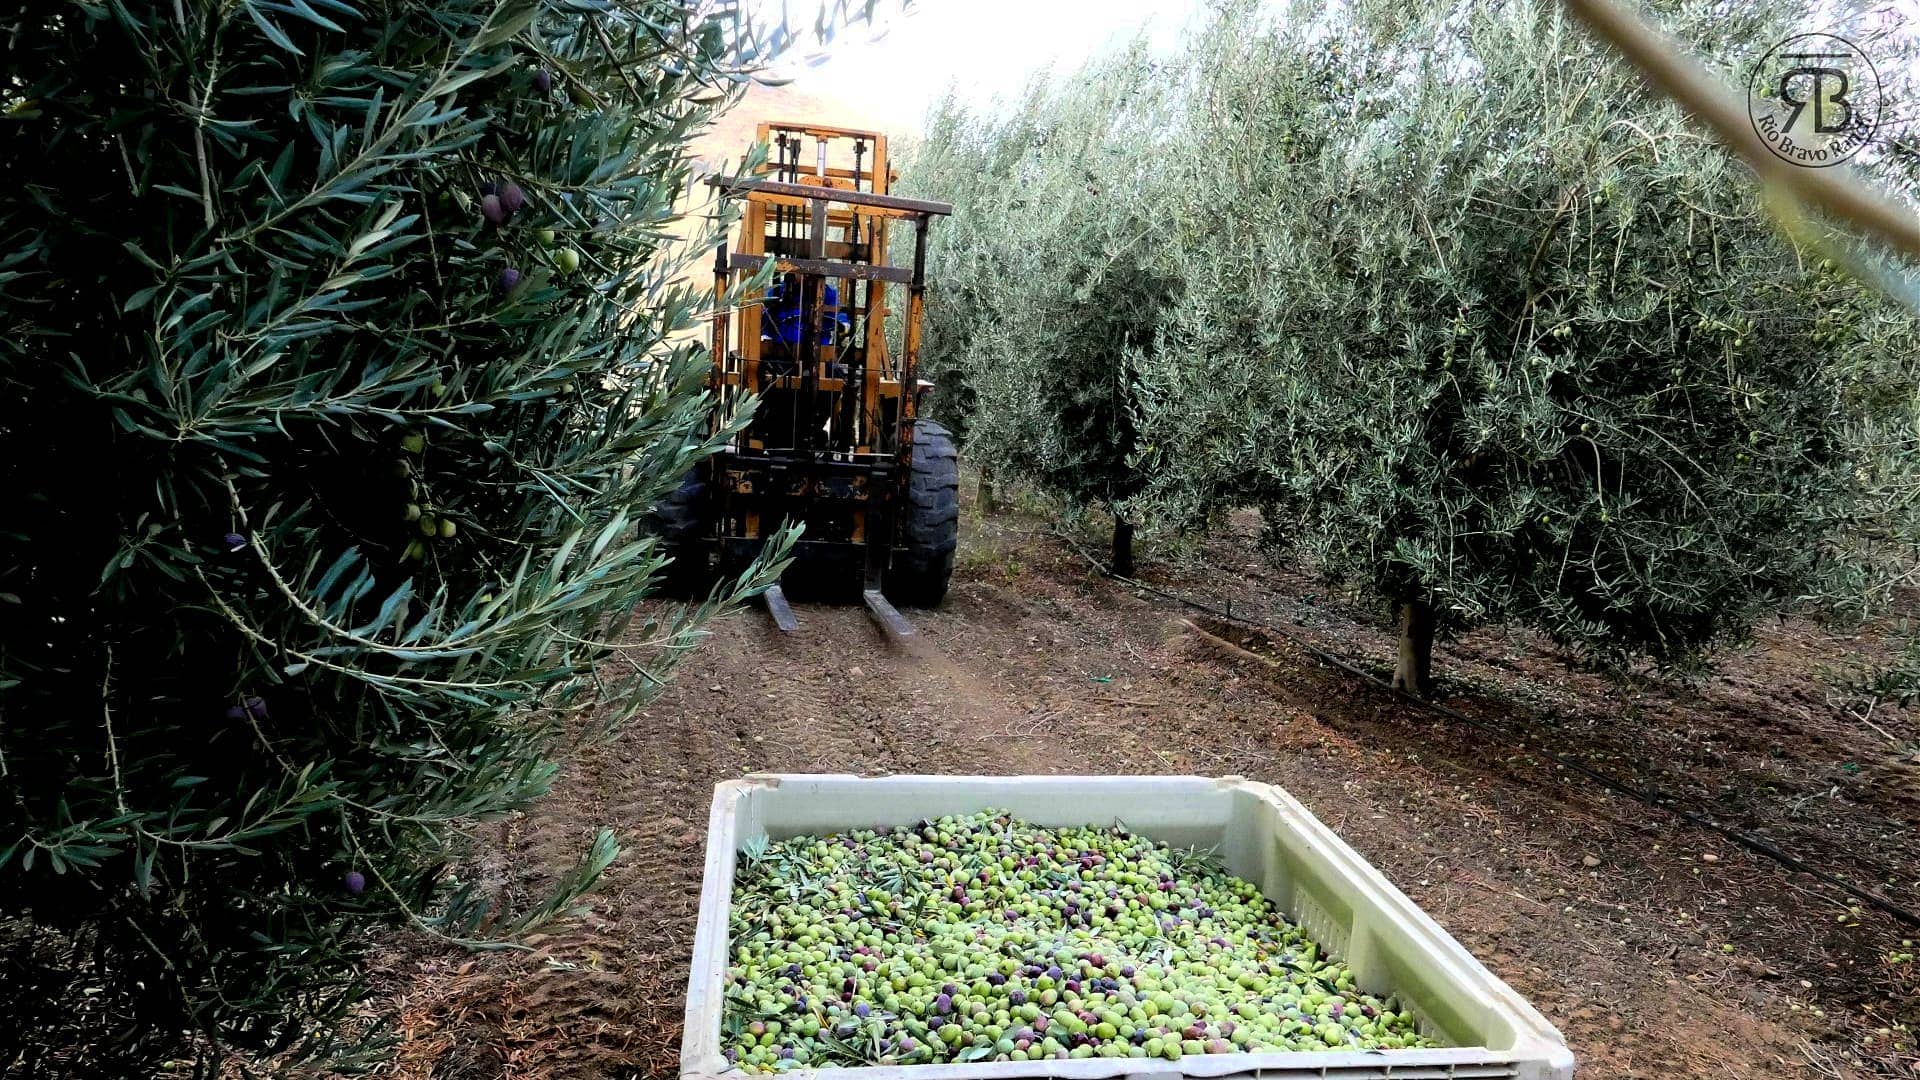 north-america-the-best-olive-oils-competitions-production-us-producers-weathered-a-difficult-season-and-emerged-with-good-results-olive-oil-times